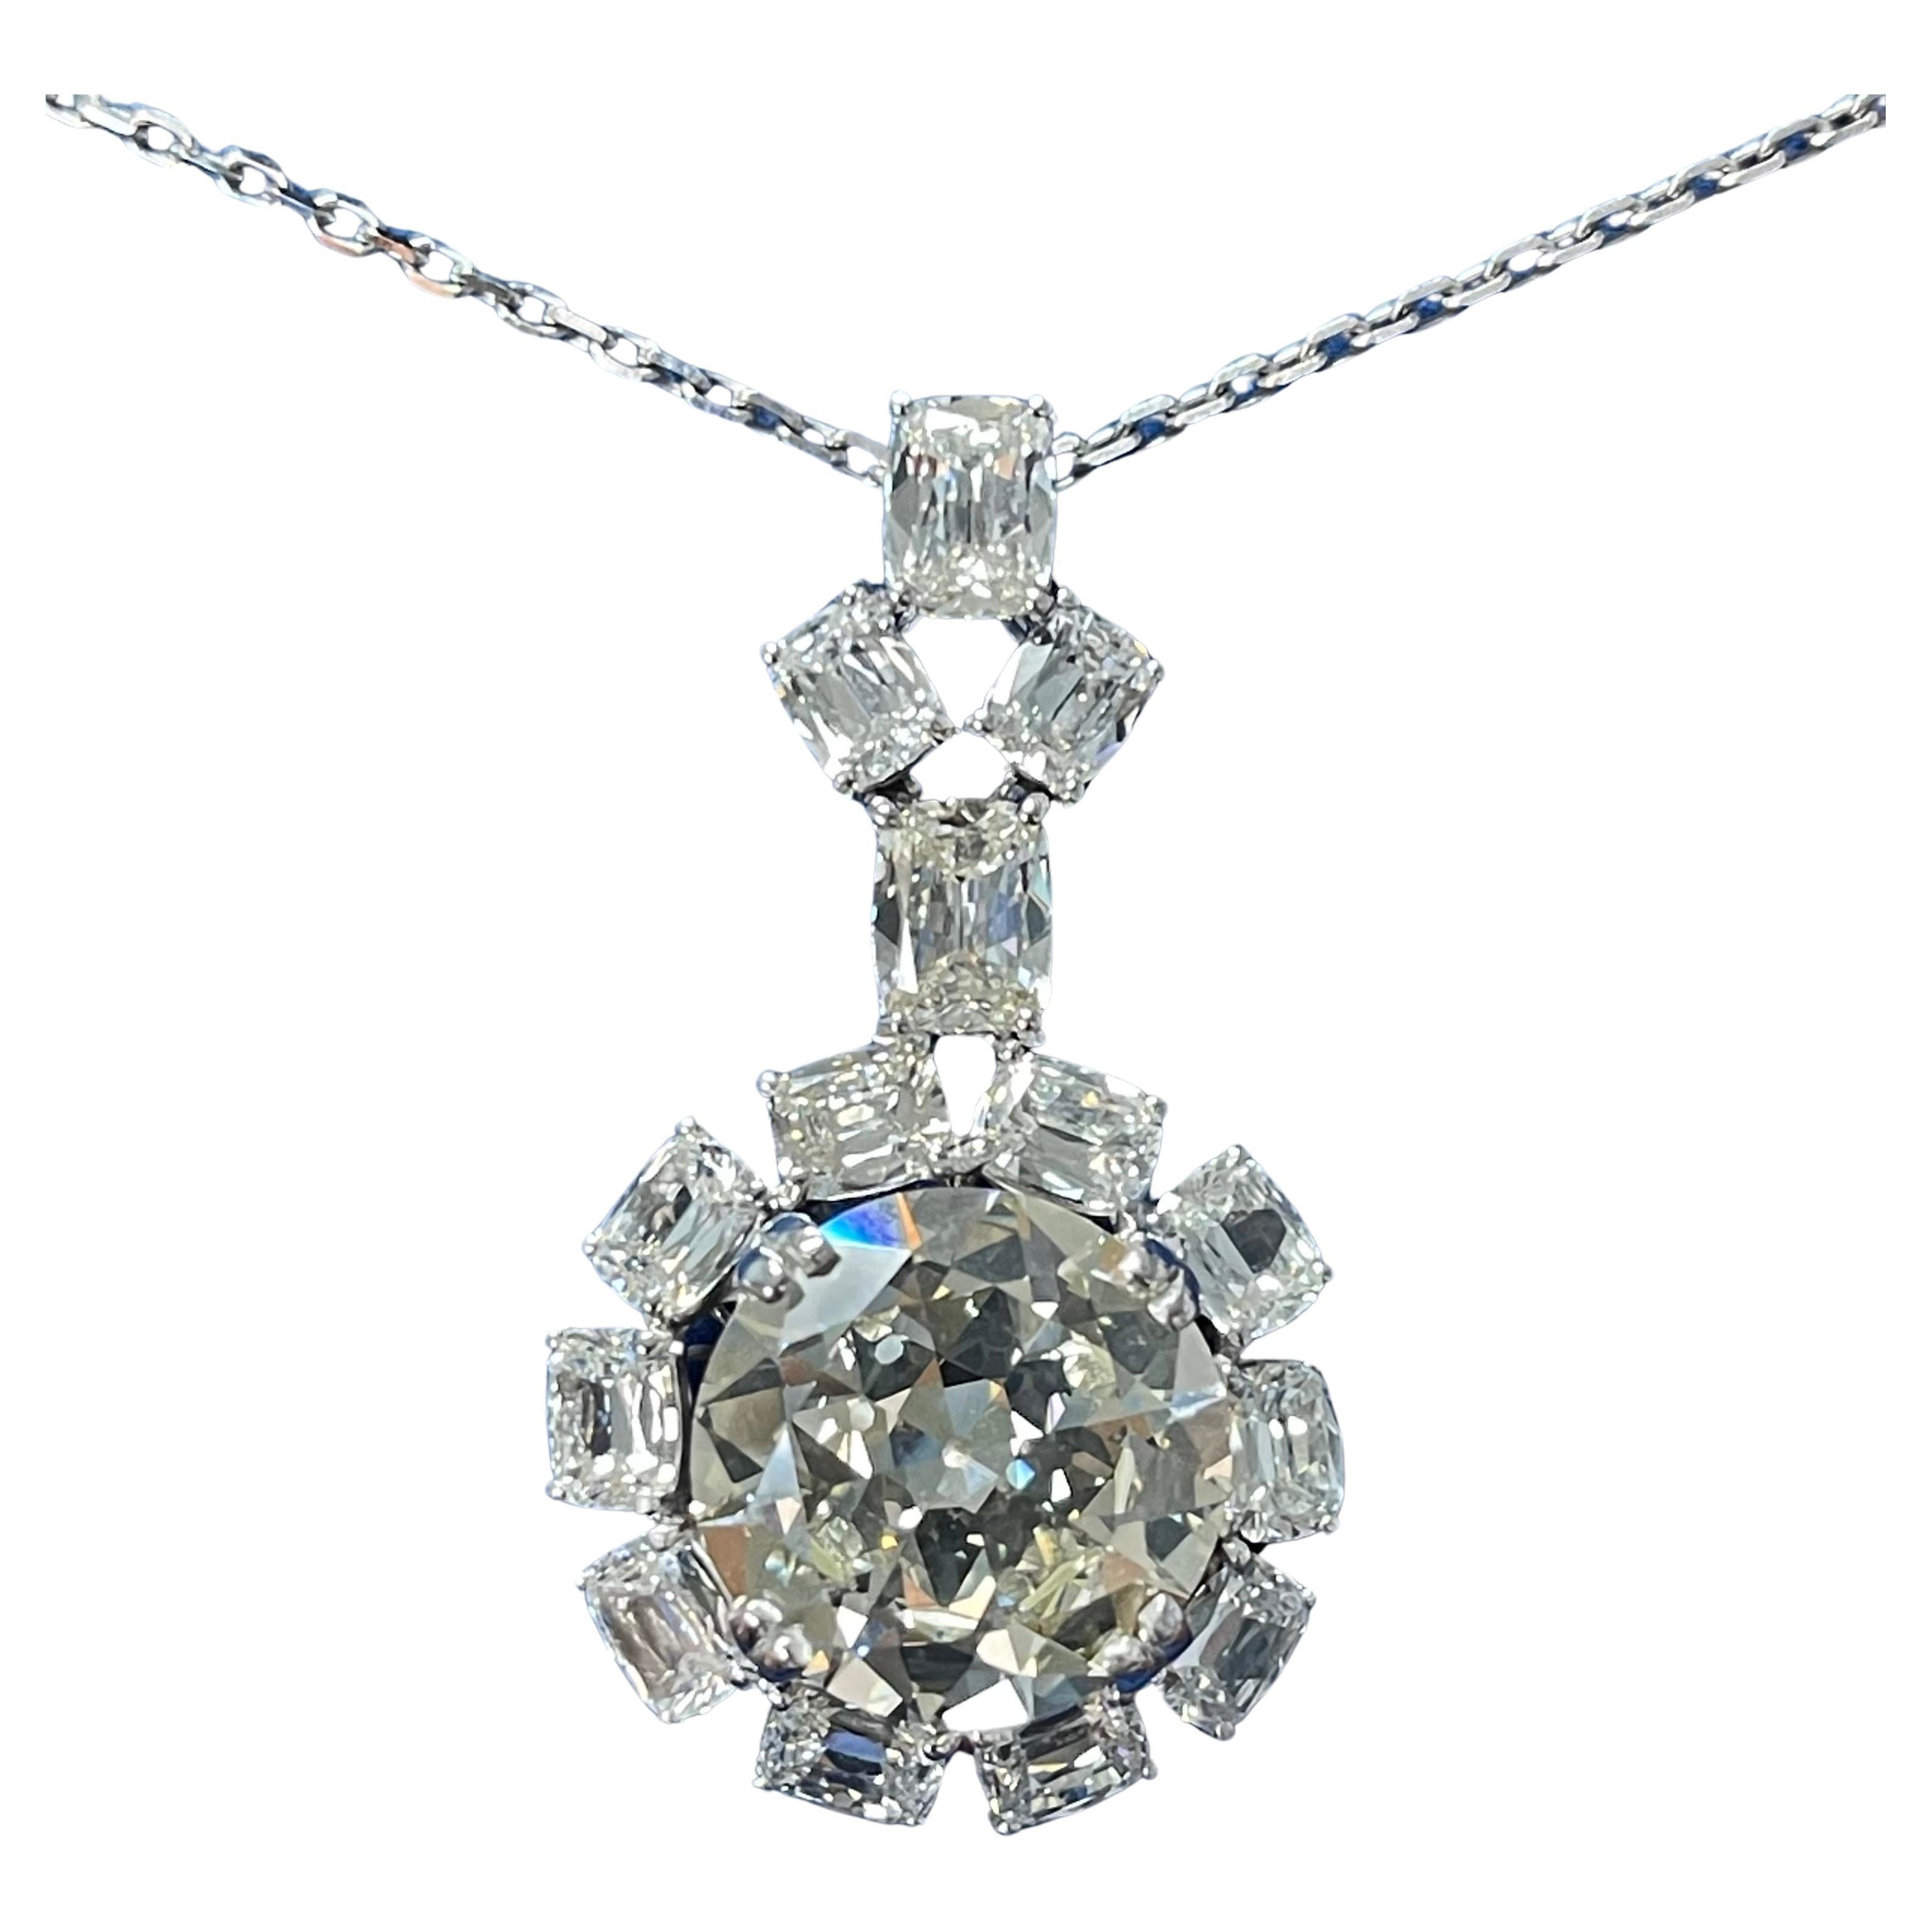 HRD Certified 9.56 Carat Old Mine Cut Diamond Necklace In 18K White Gold. 